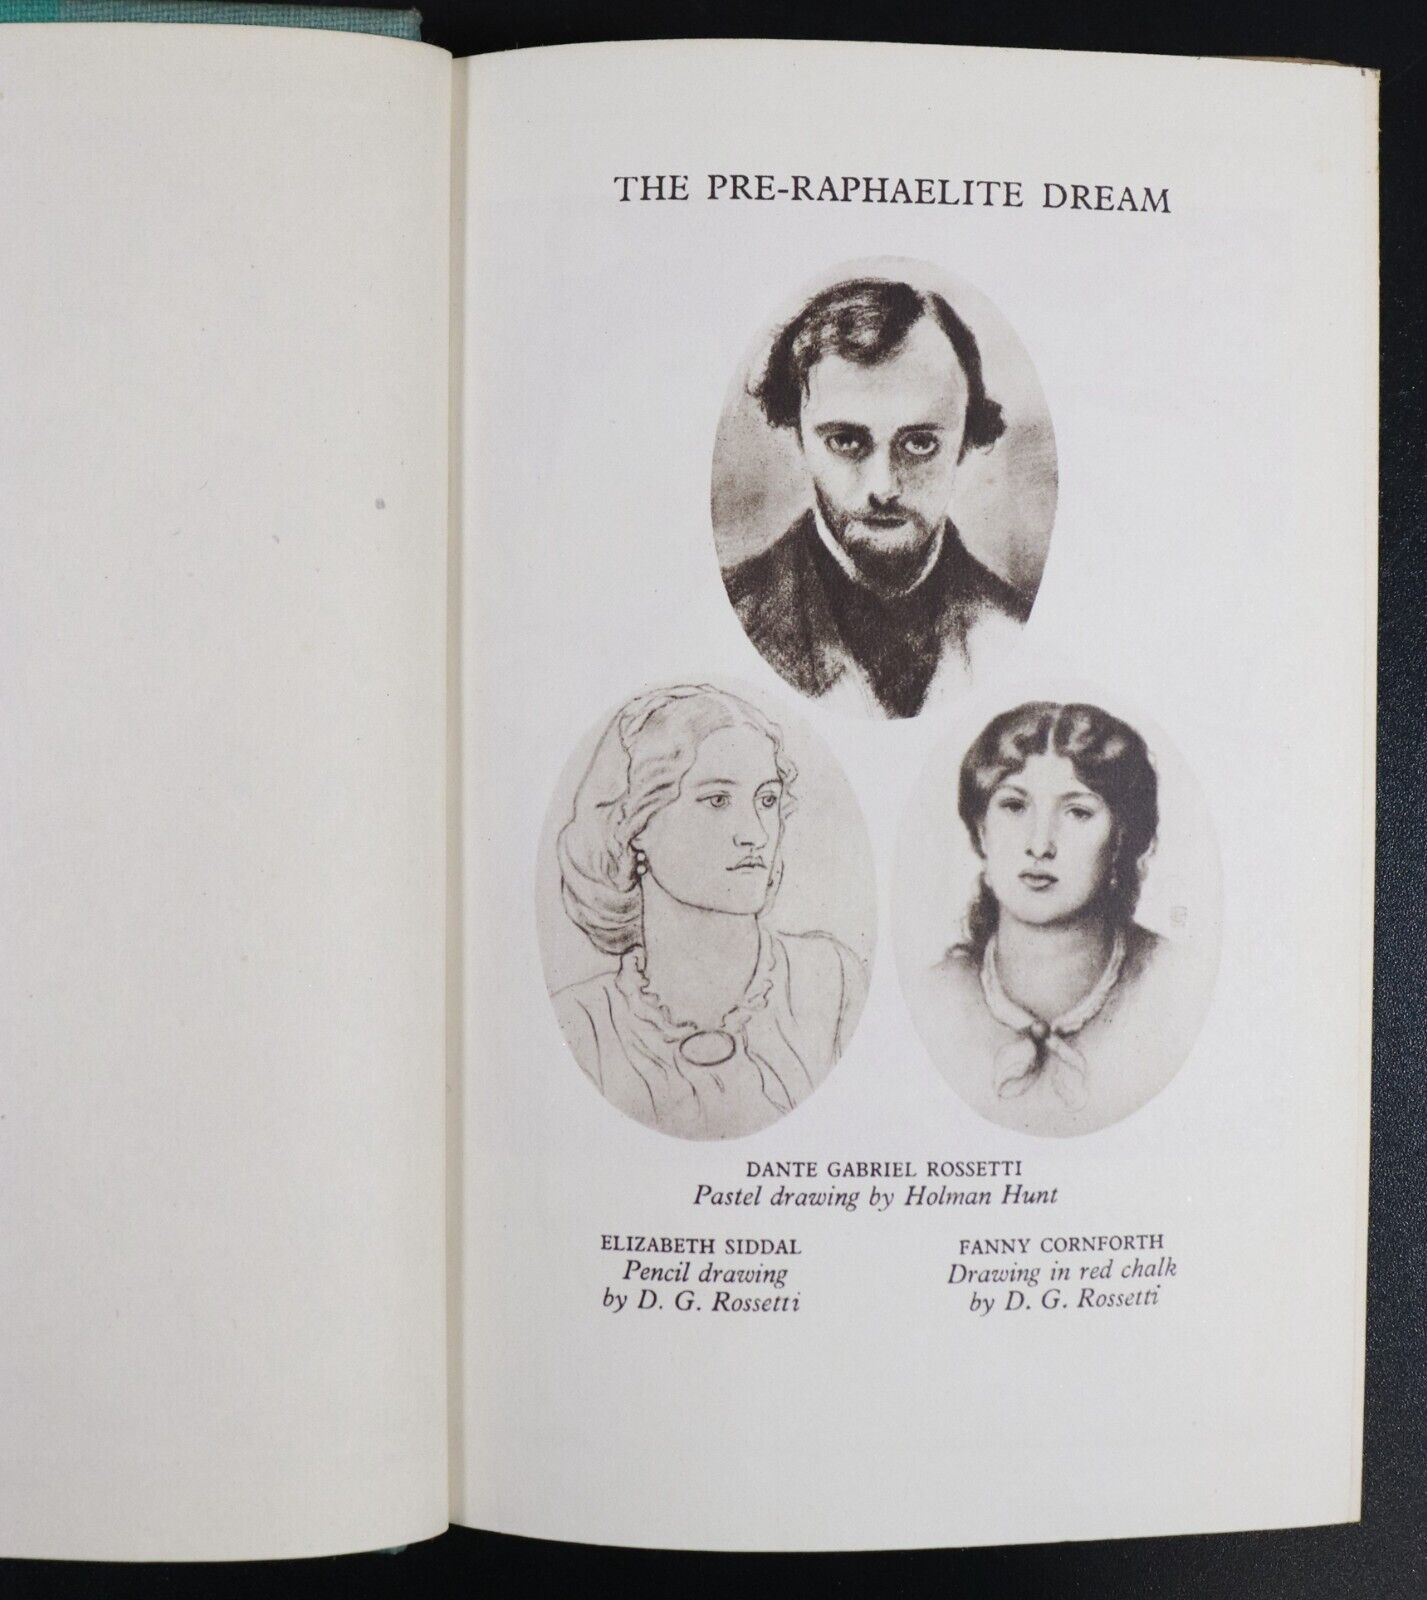 1943 The Pre-Raphaelite Dream by William Guant Art History Book Illustrated